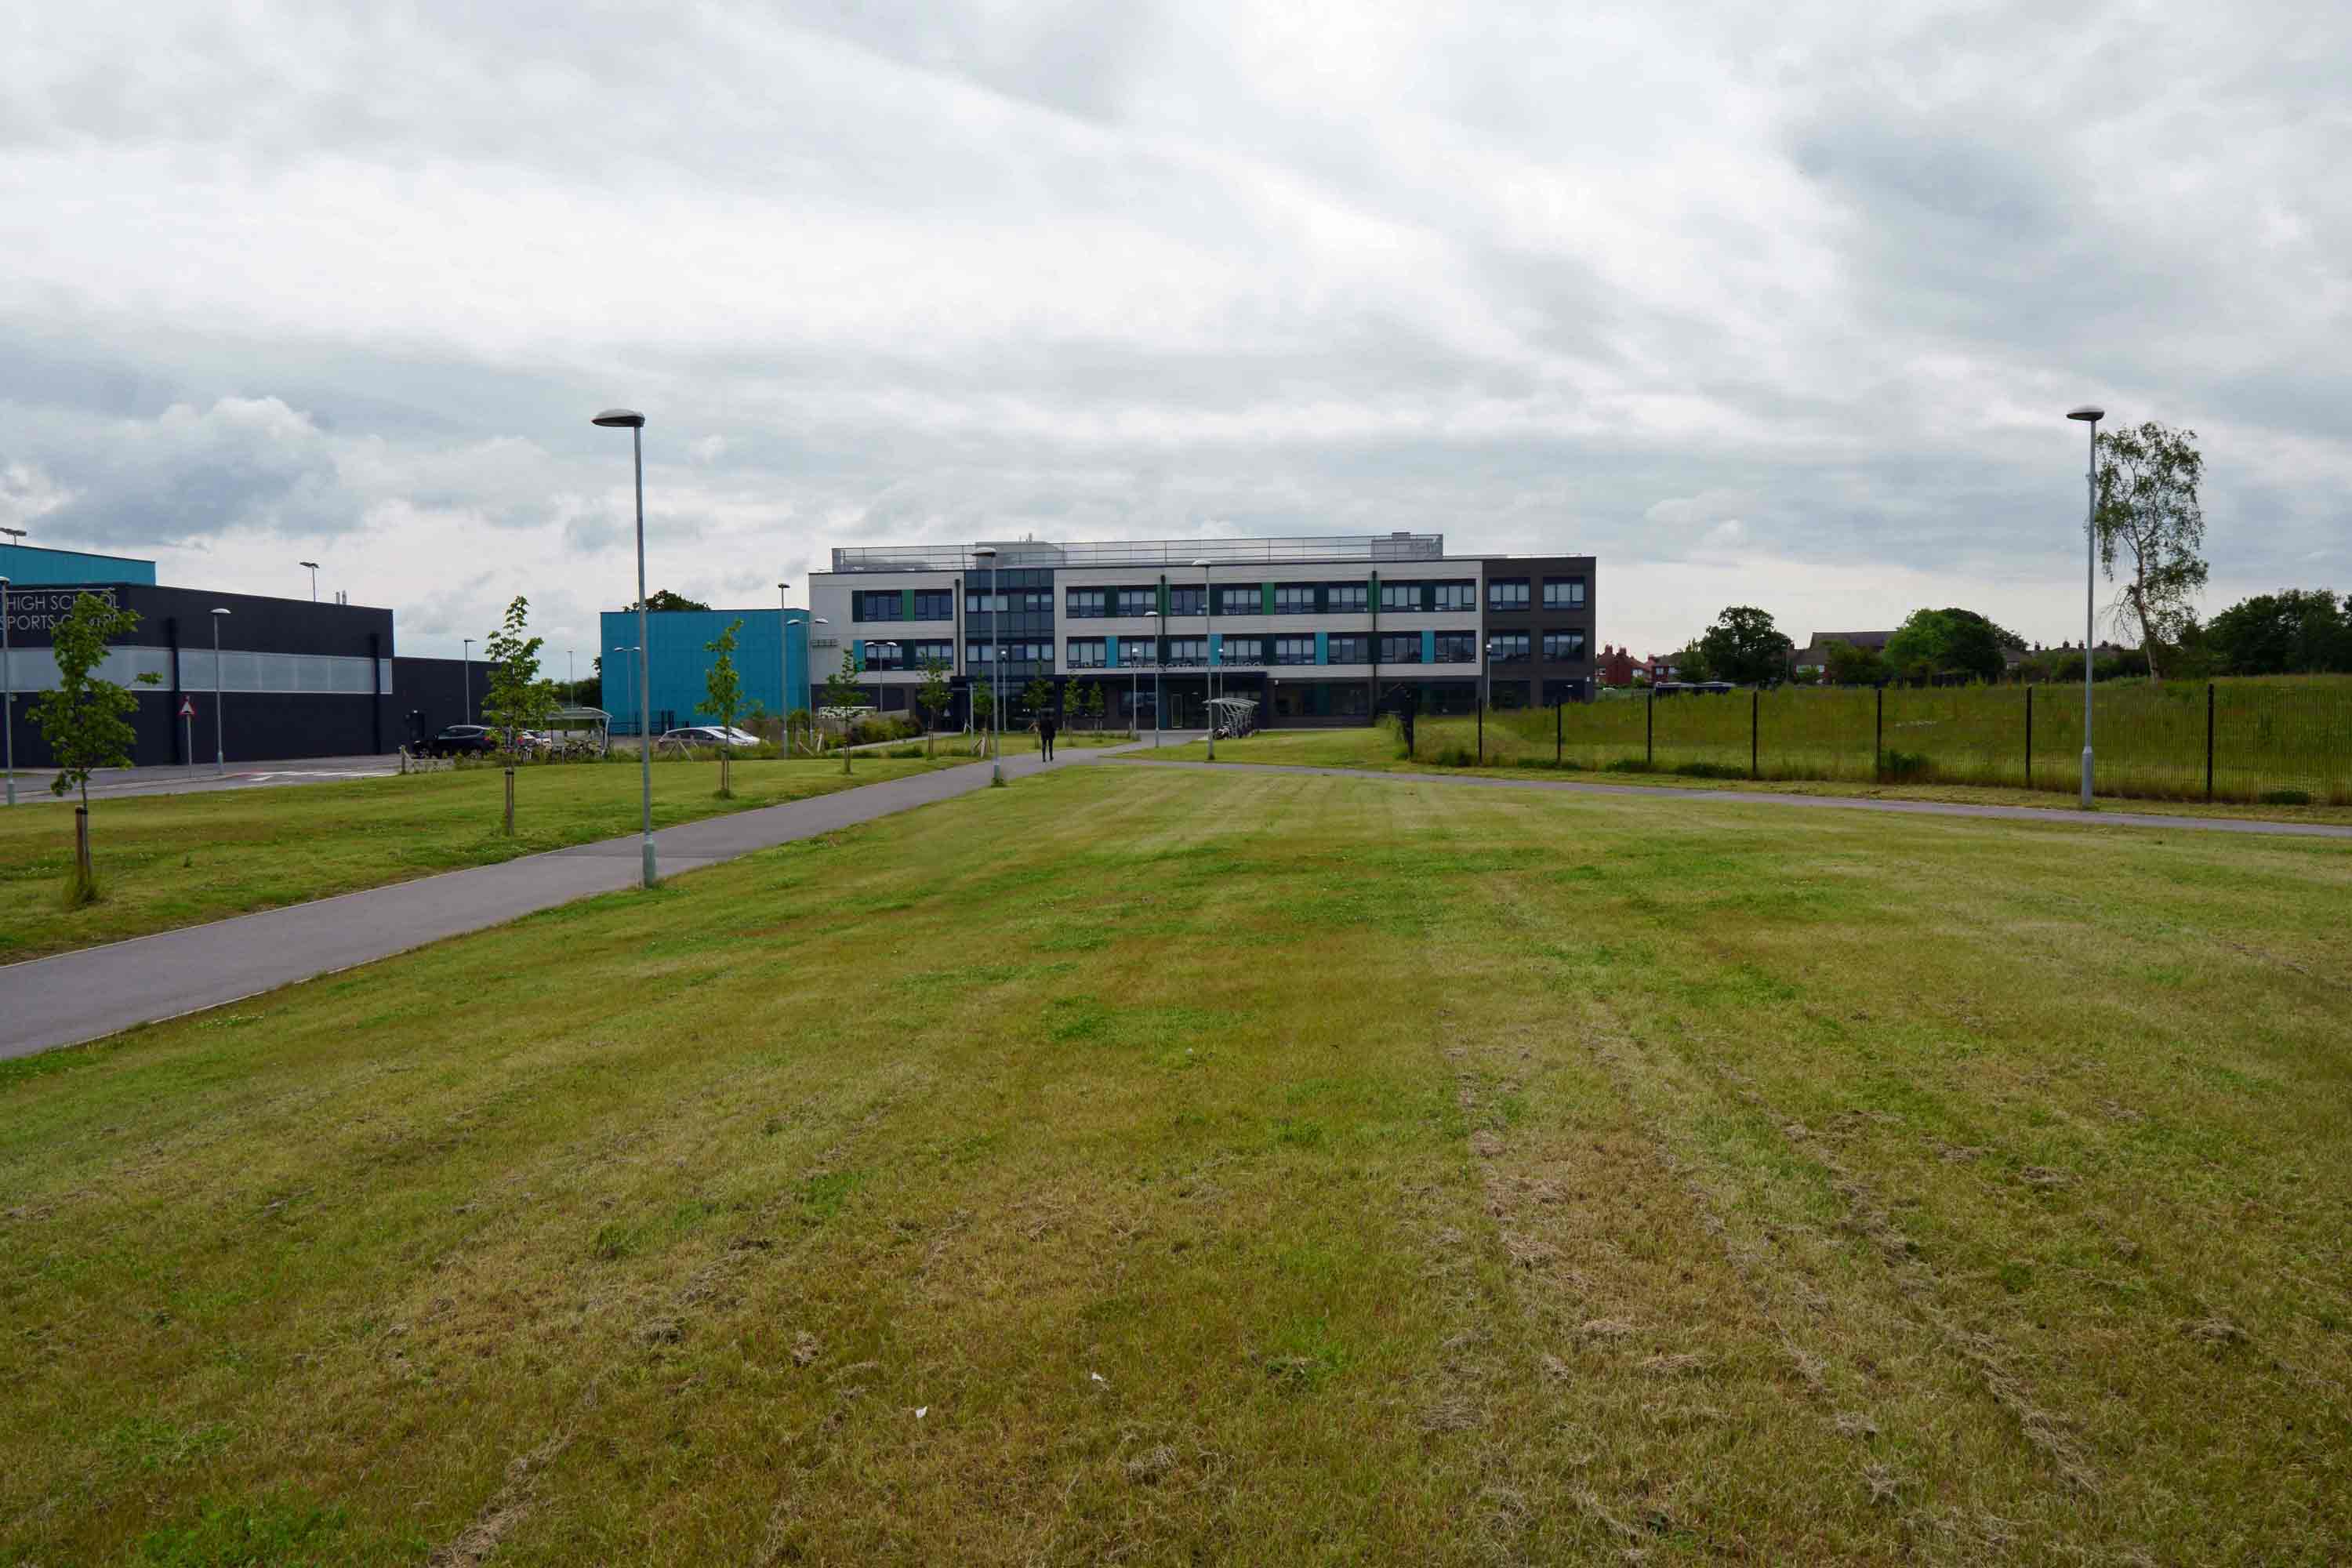 Harrogate High School - the area where the art installation will be sited